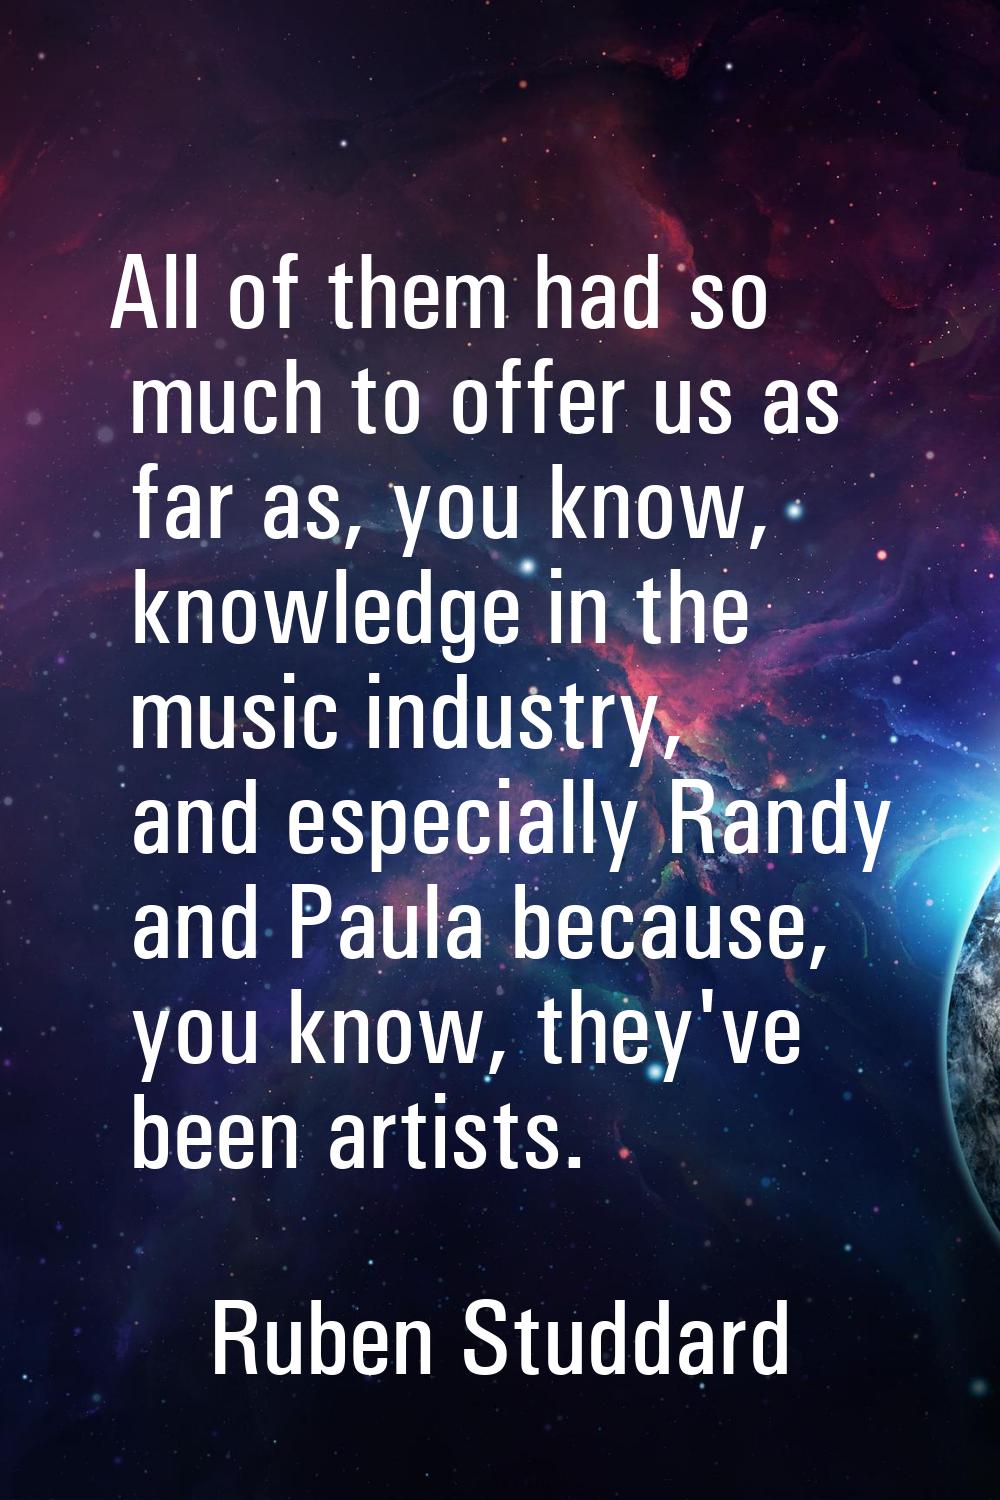 All of them had so much to offer us as far as, you know, knowledge in the music industry, and espec